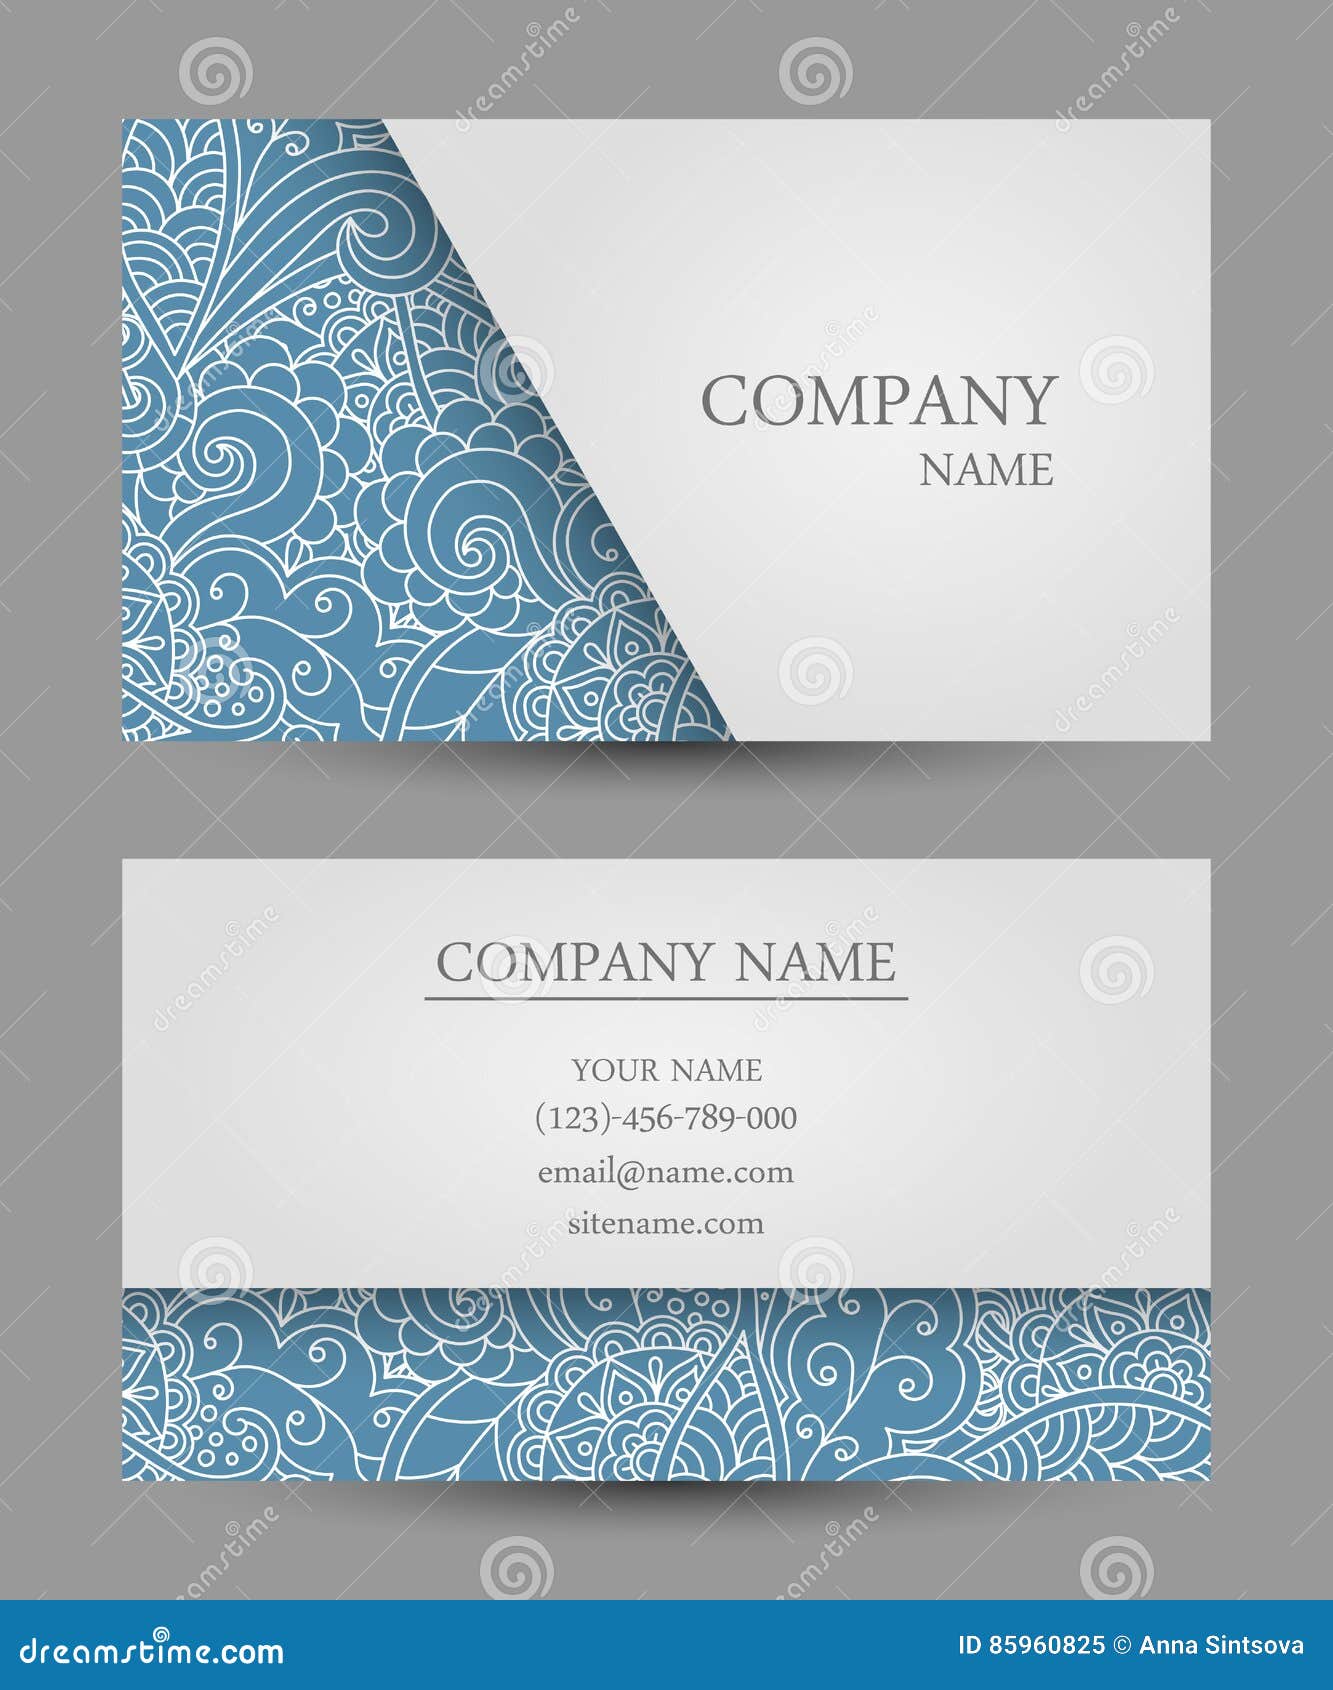 Business Card Border Template from thumbs.dreamstime.com